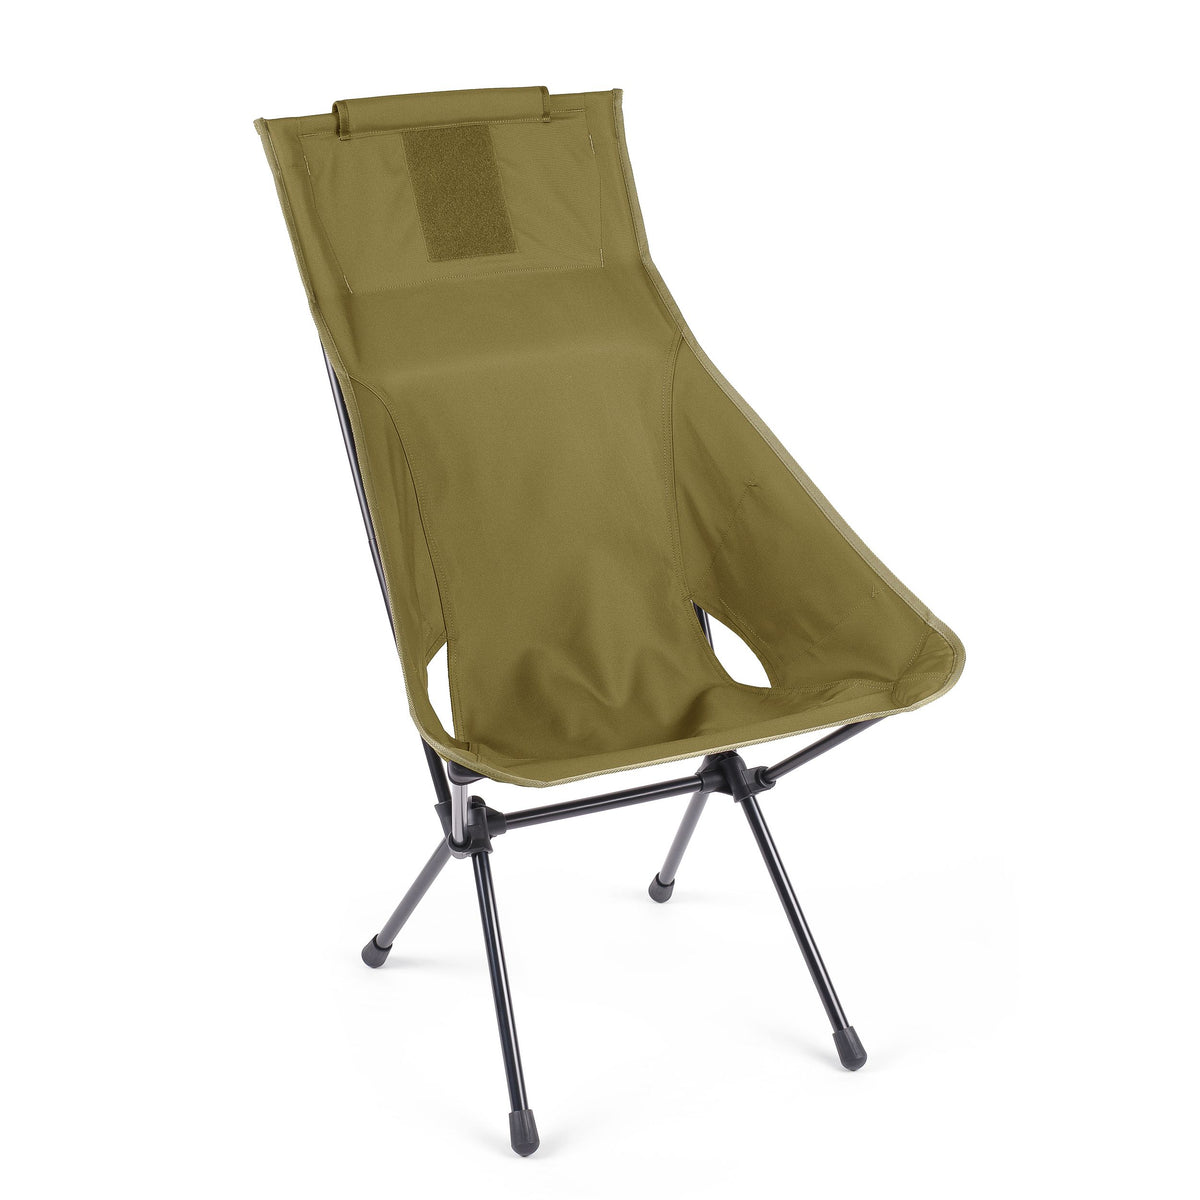 Helinox - Tactical Sunset Chair - Coyote Tan